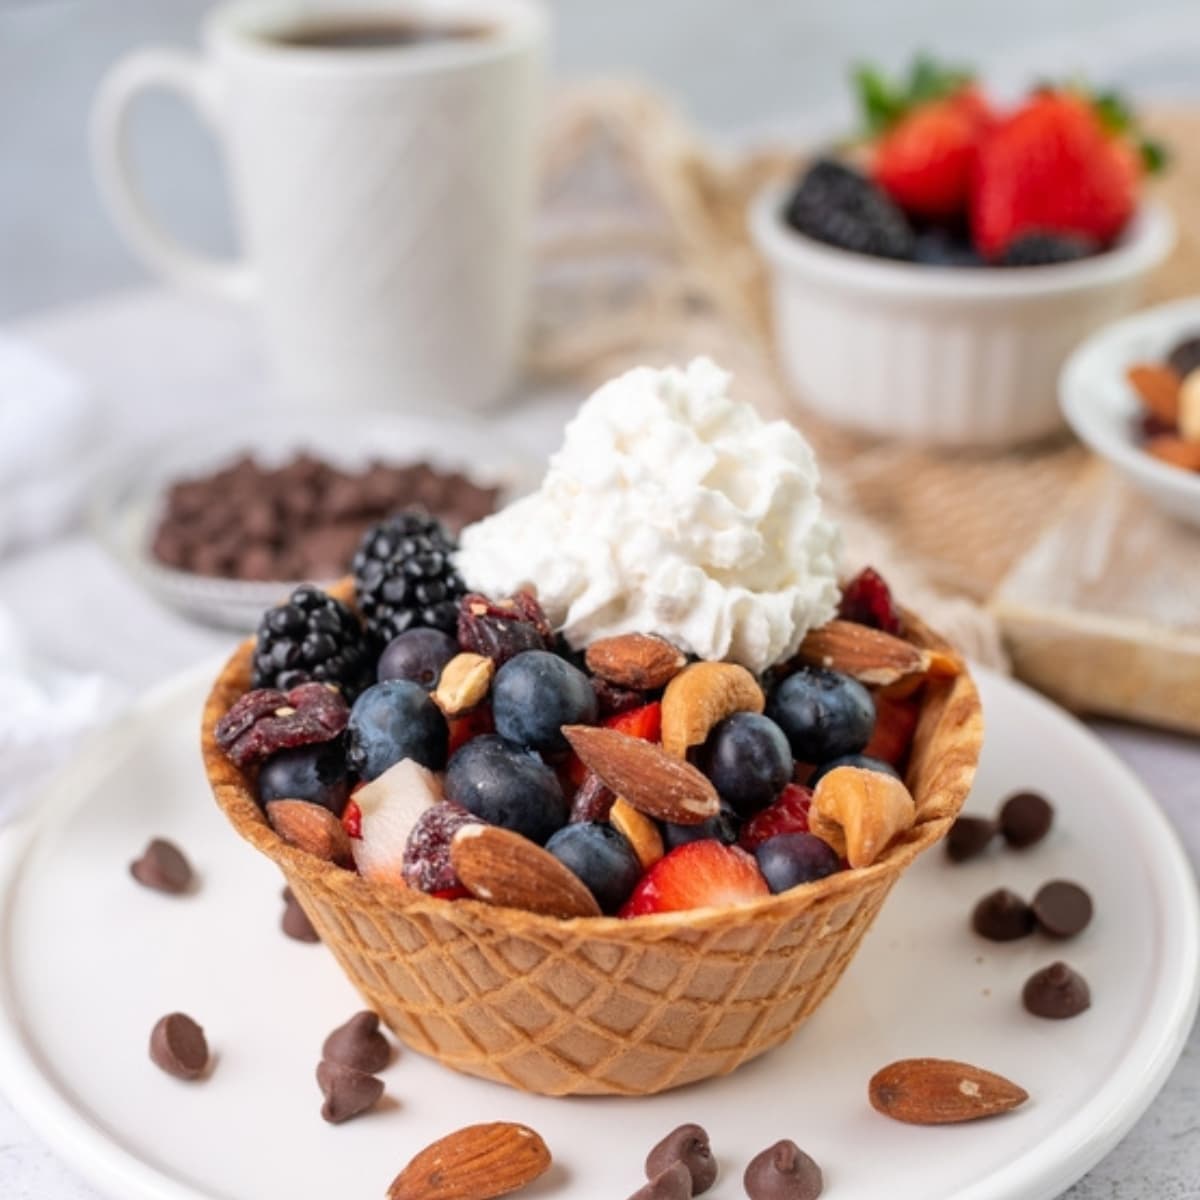 Yogurt And Fruit In A Waffle Bowl